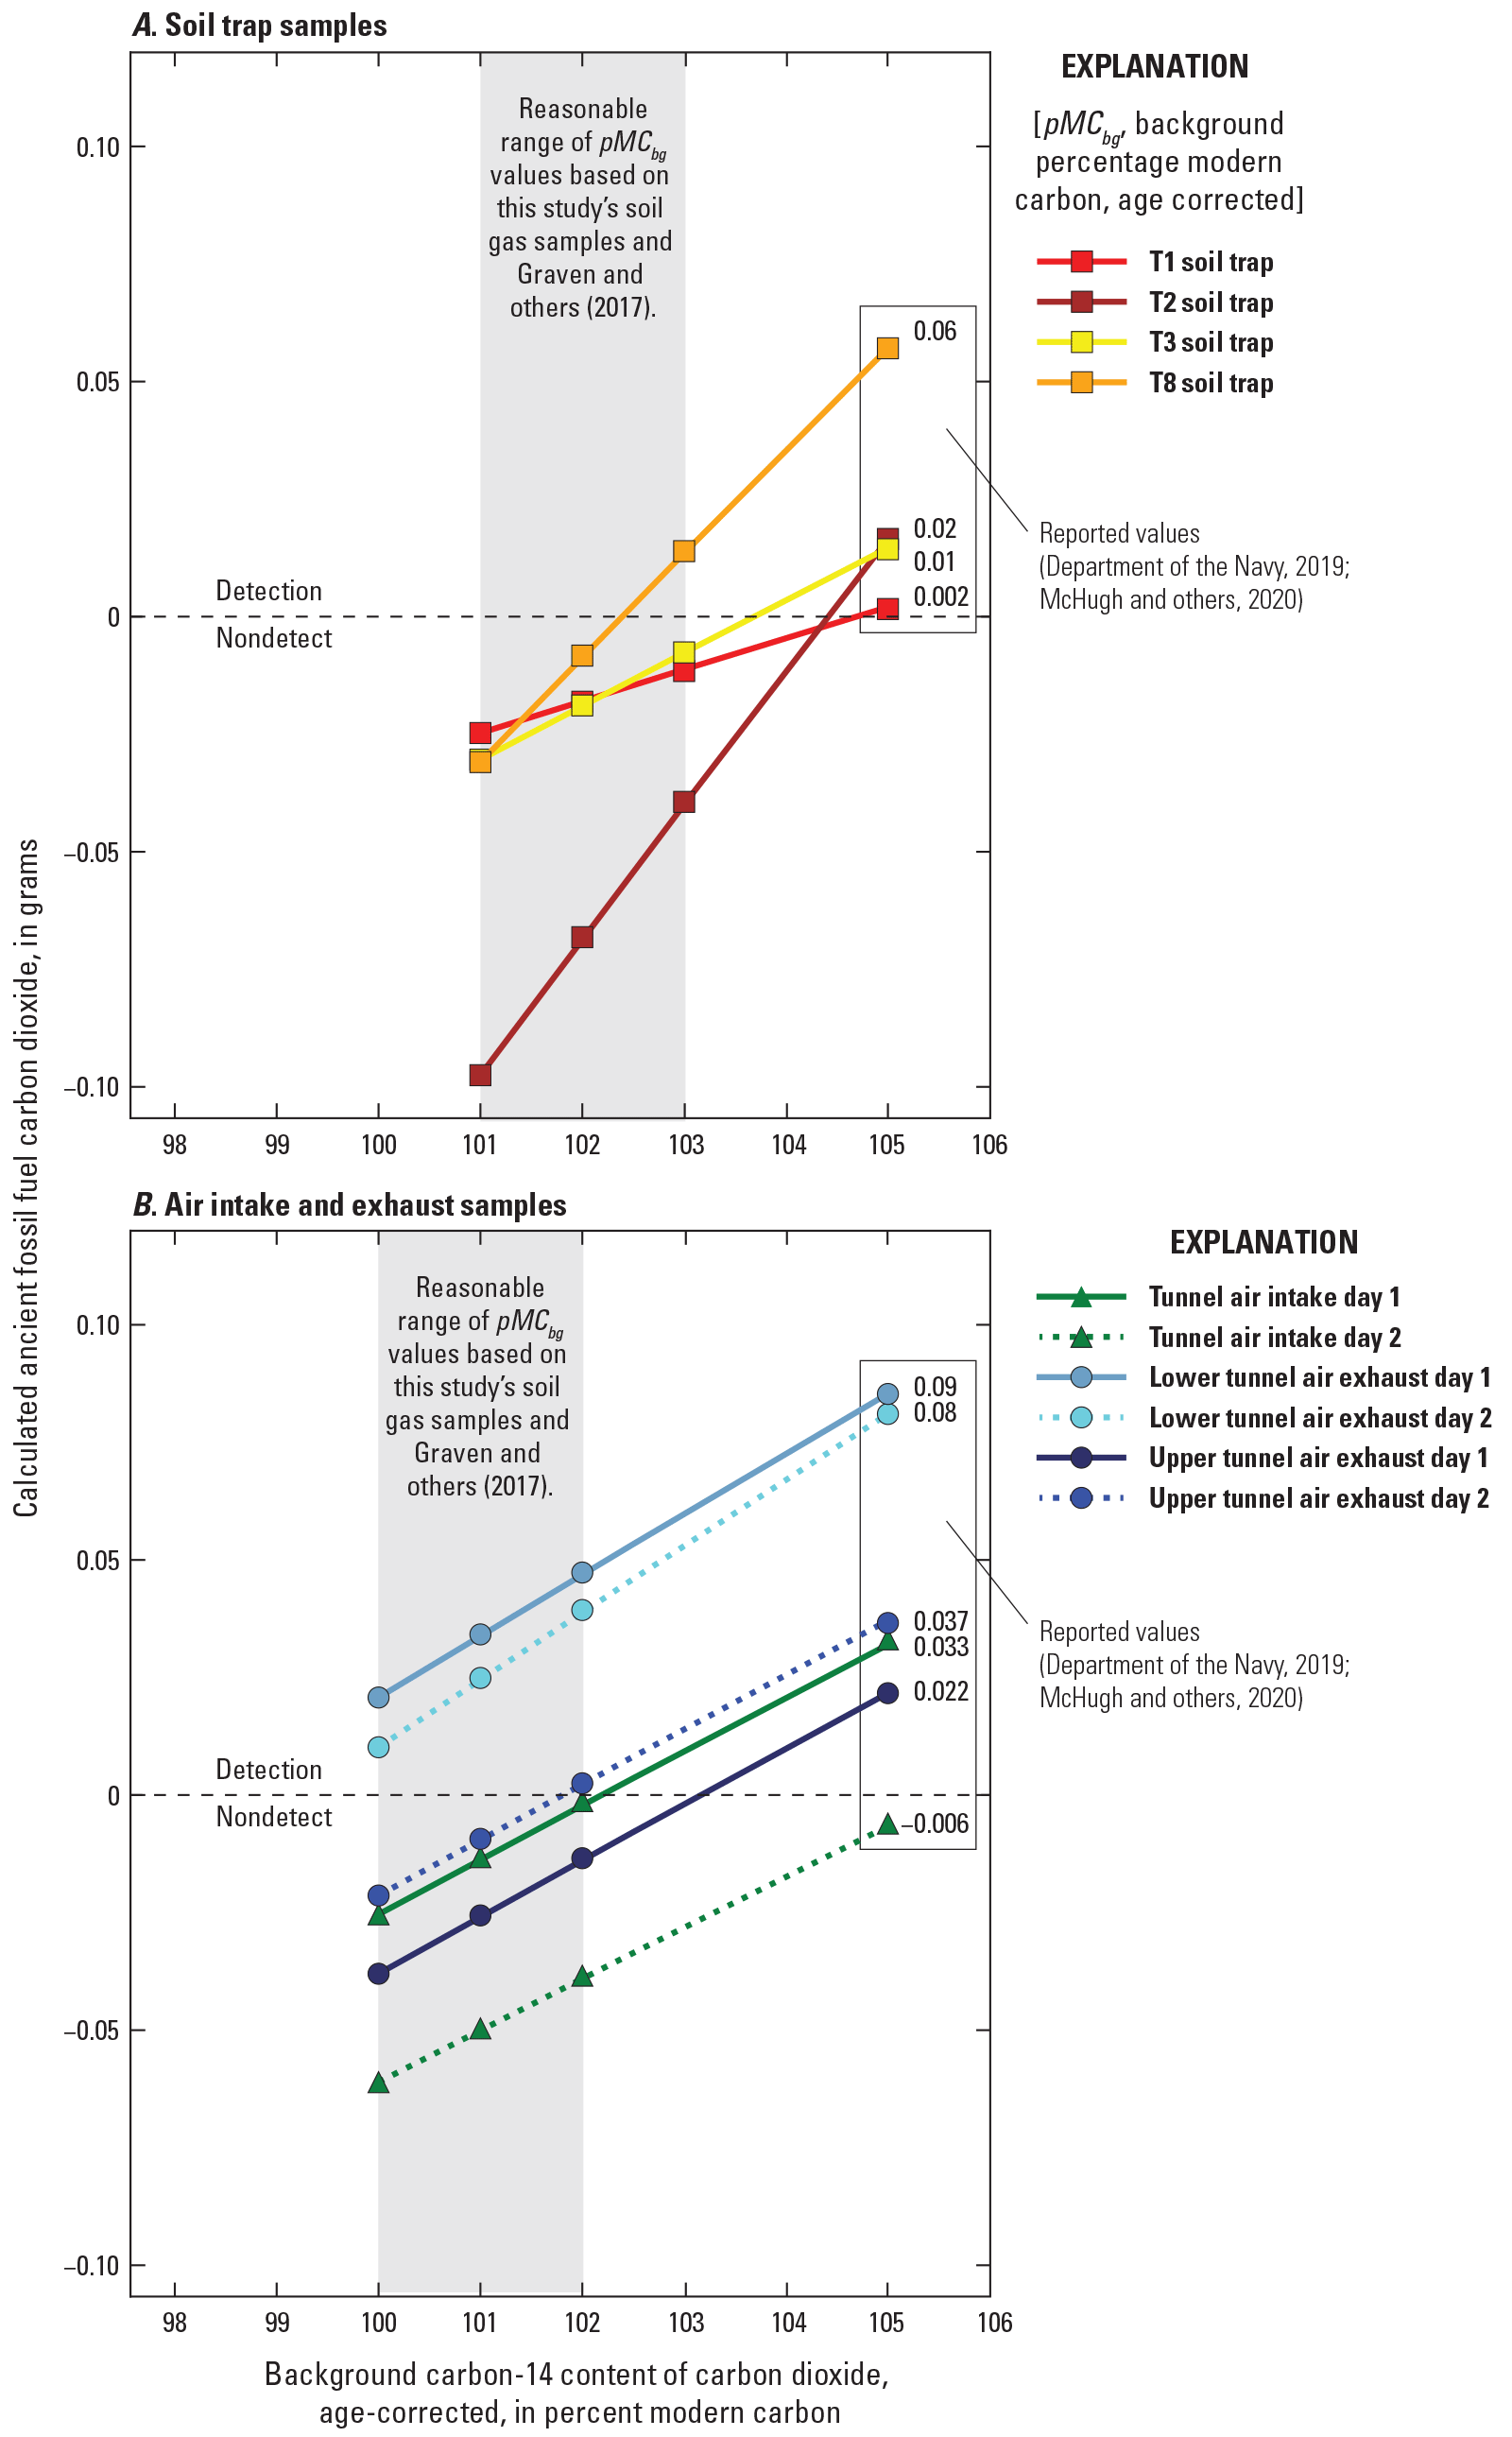 Four soil trap samples in panel A indicate calculated ancient carbon dioxide increases
                        with the assumed background percentage modern carbon. Recalculations of tunnel air
                        intake and upper and lower tunnel exhaust measurements indicate only the lower tunnel
                        exhaust has ancient carbon.